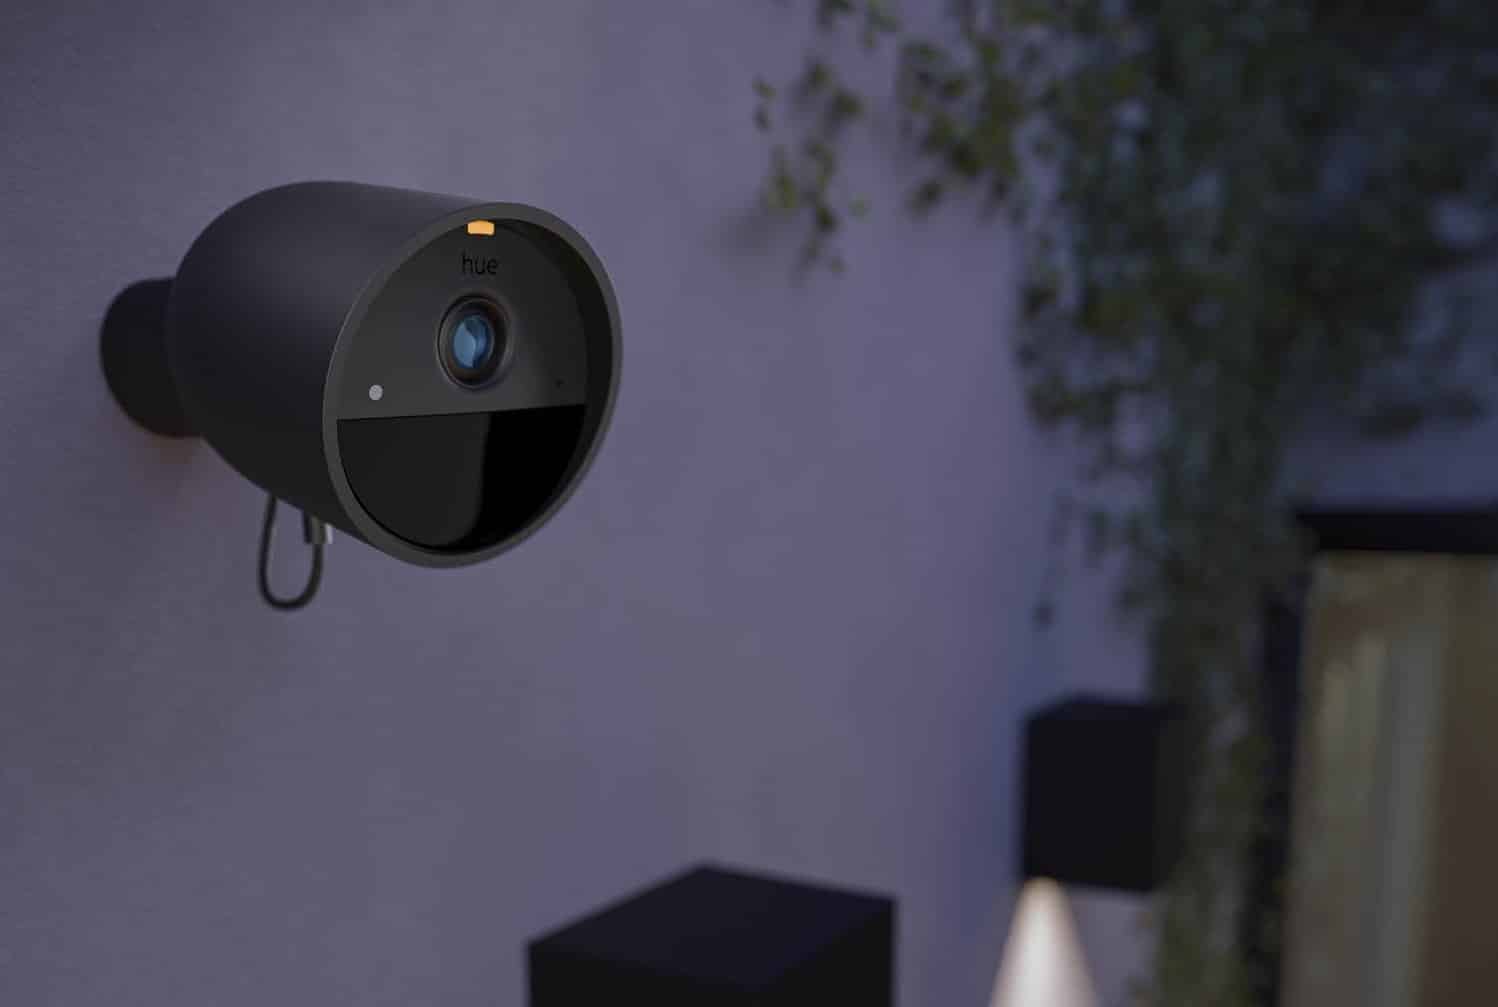 Hueblog: Wireless Hue Secure Camera is now available to order